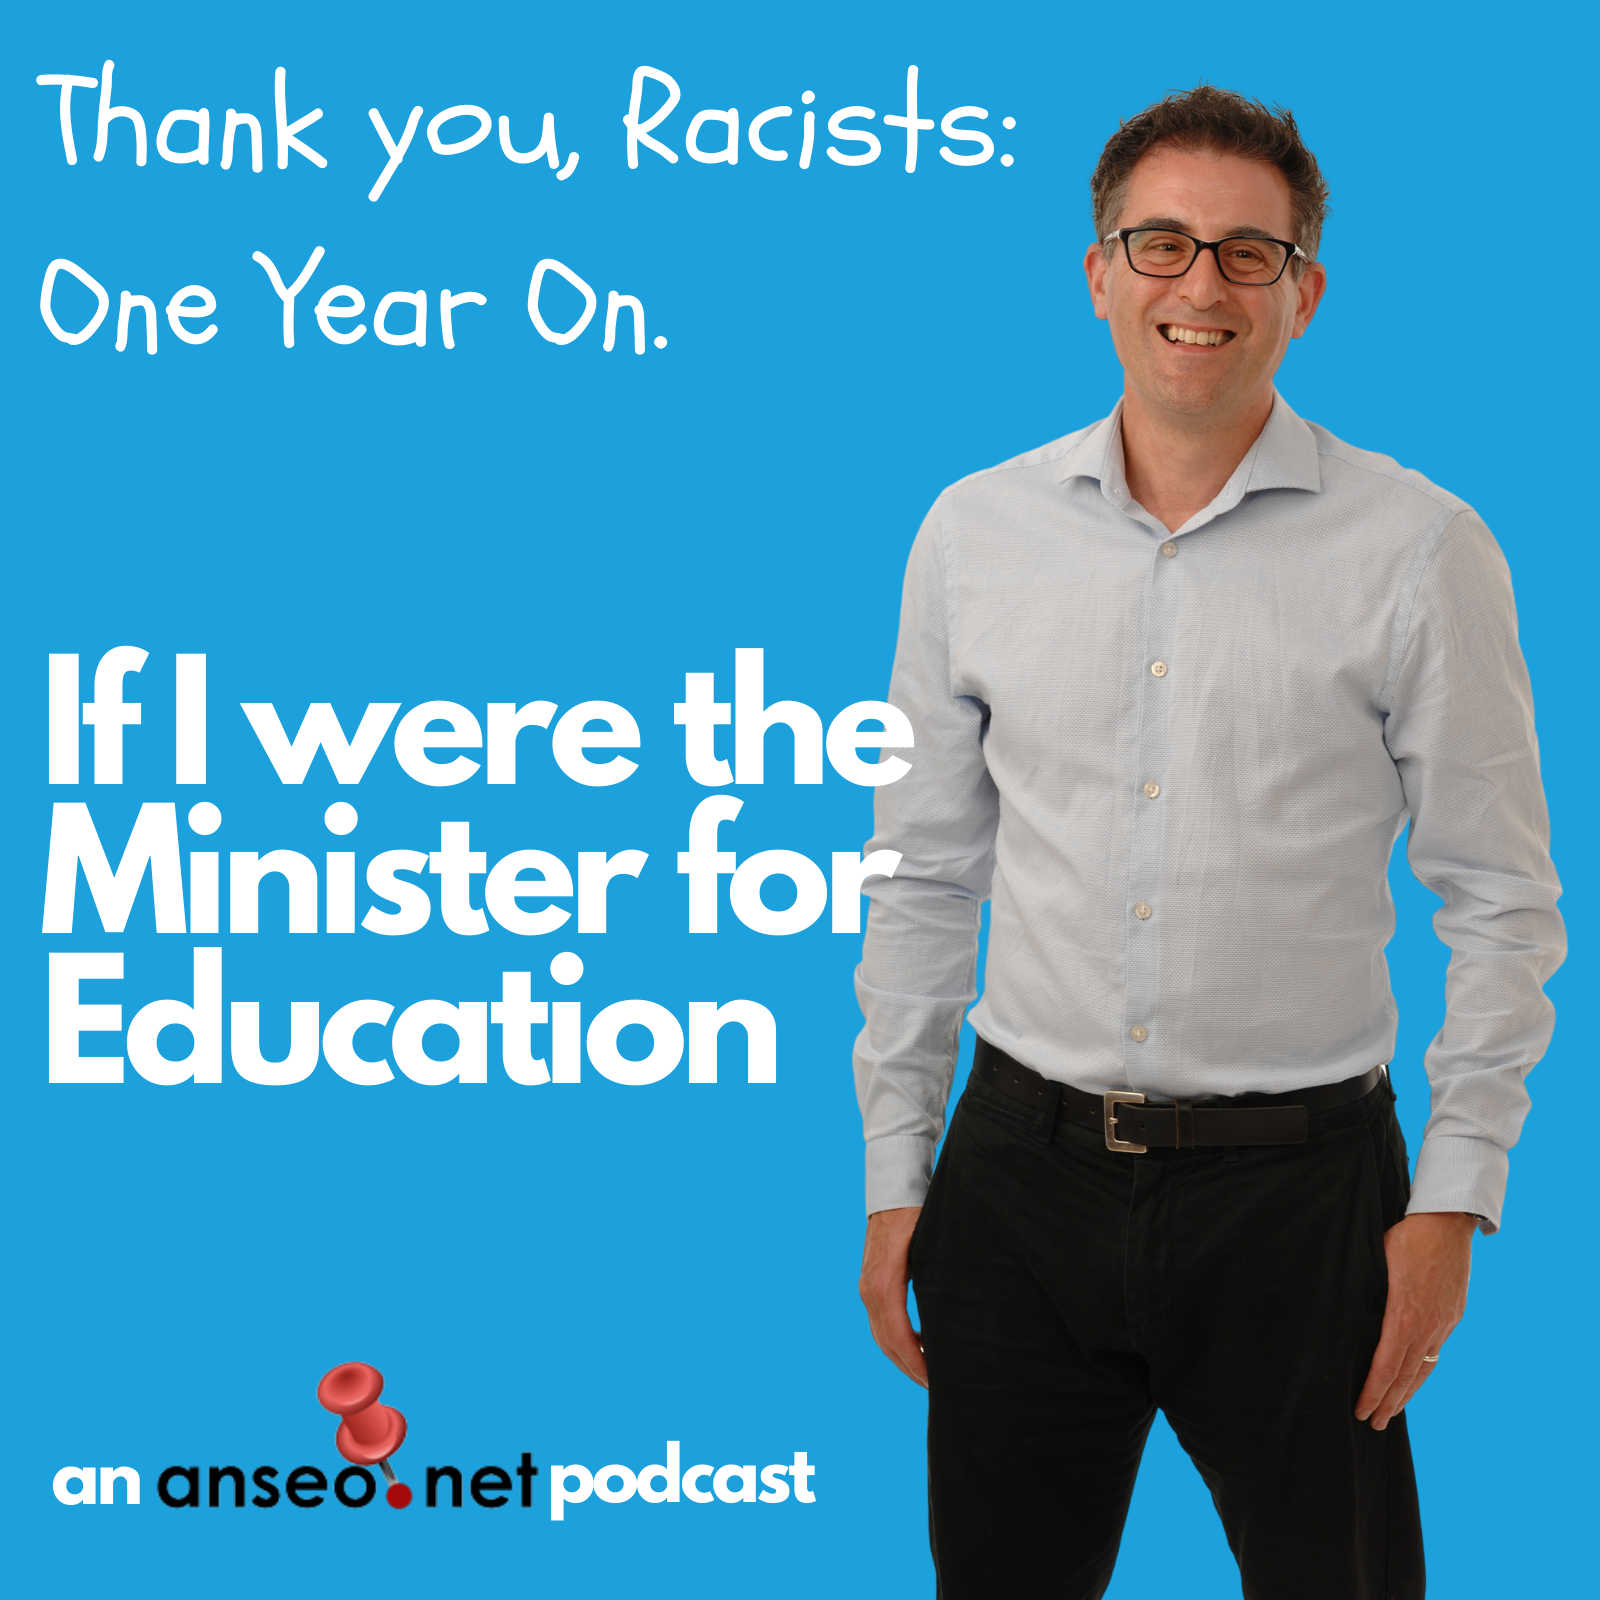 Thank you, Racists – 1 Year On